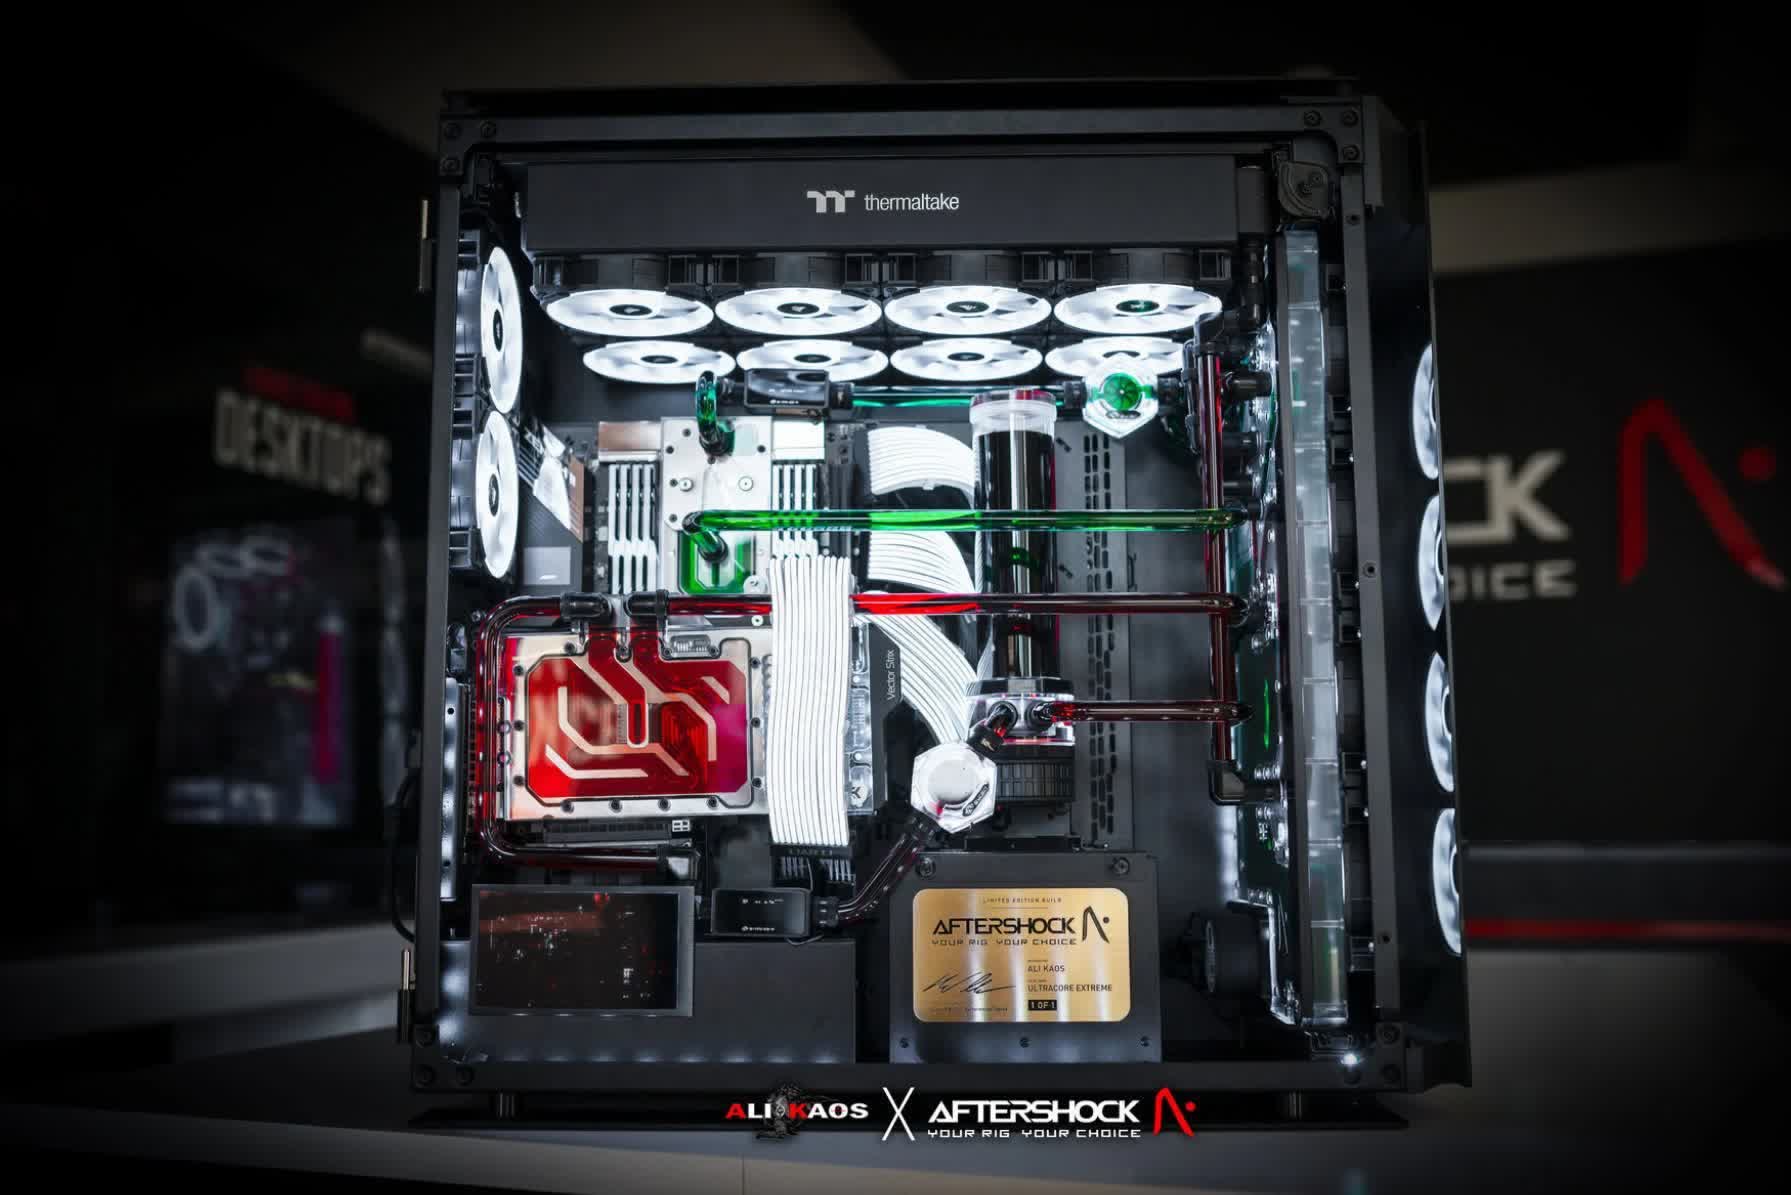 This $23,000 custom PC features two RTX 3090 cards, an AMD 3990X Threadripper, and 128GB RAM